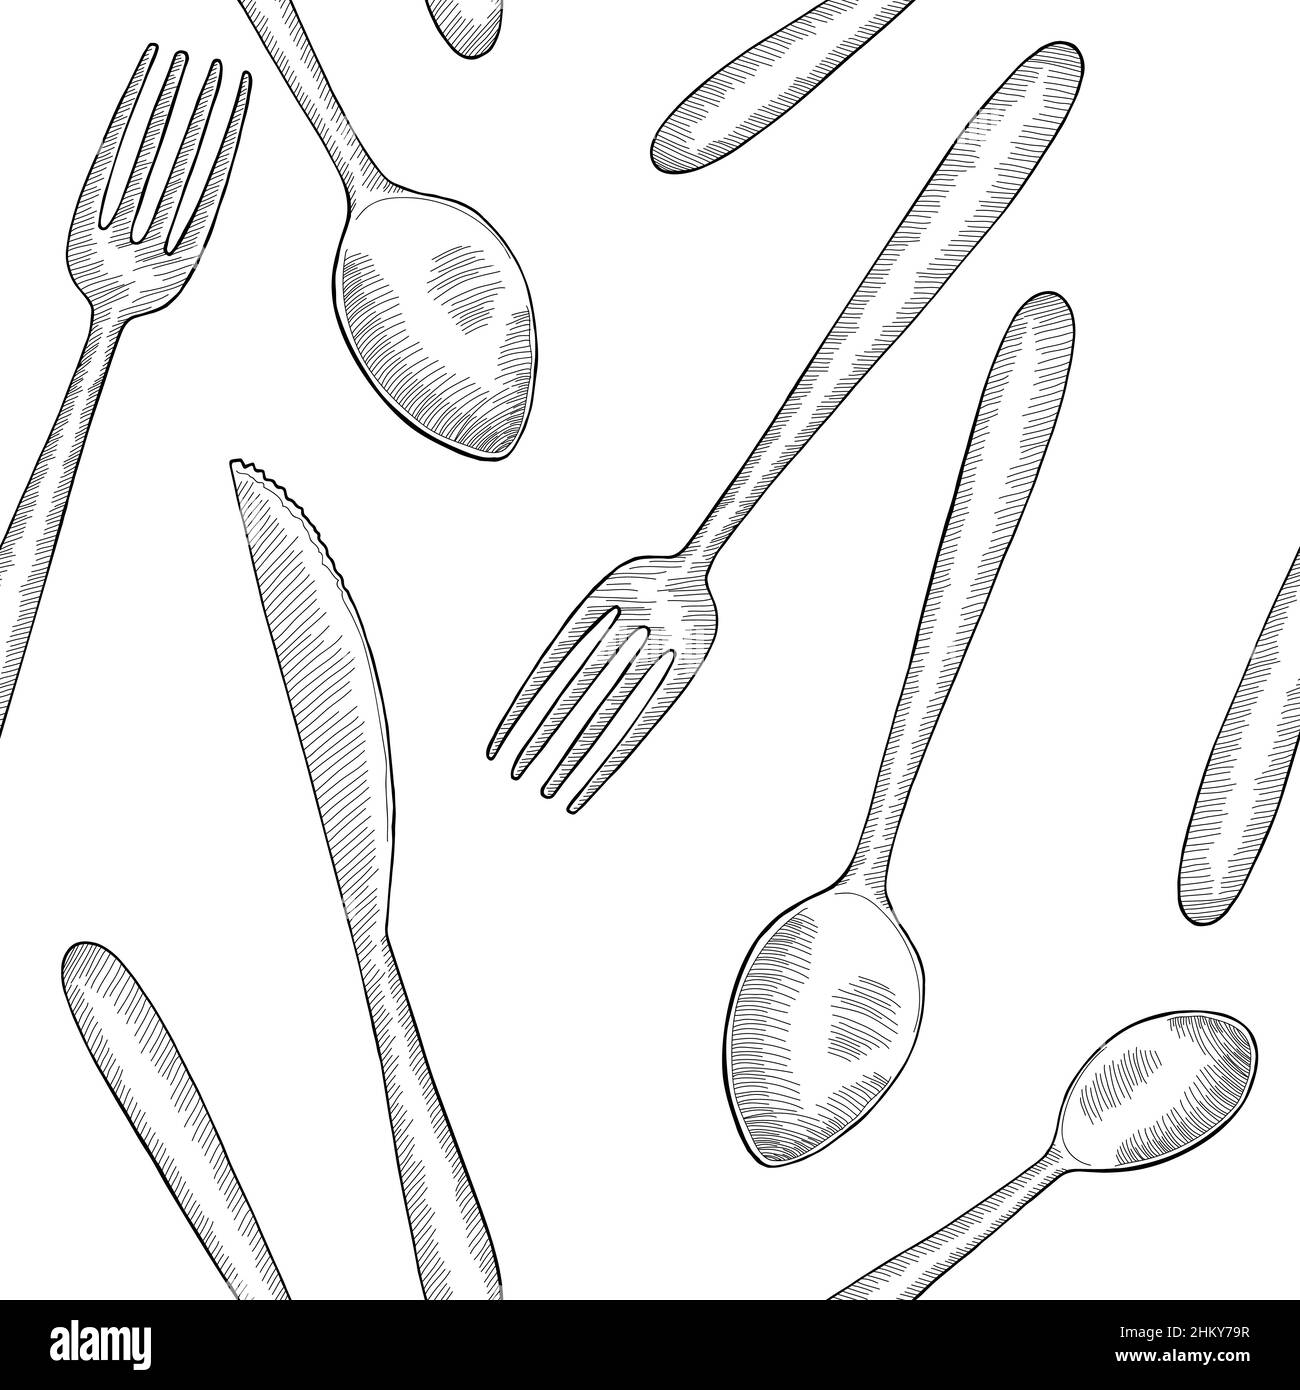 Fork spoon knife graphic black white seamless pattern background sketch illustration vector Stock Vector